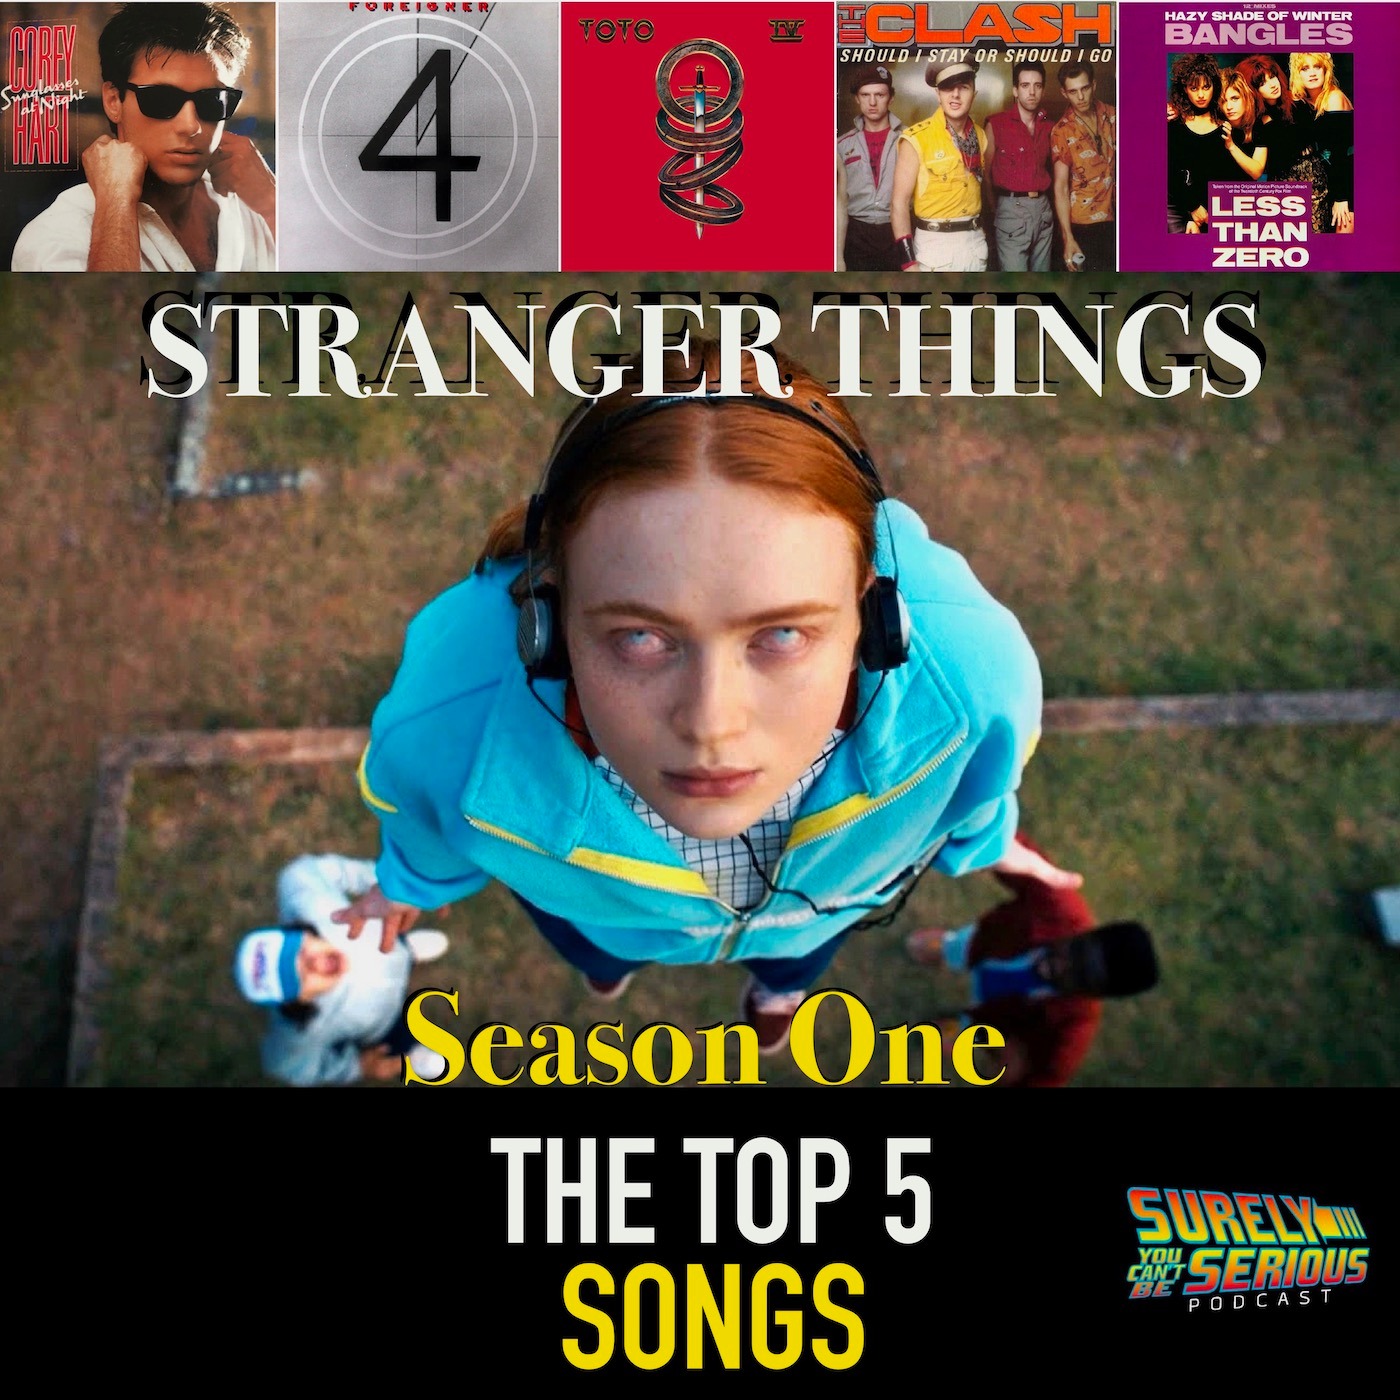 Stranger Things Soundtrack: Season 1 Episodes 5-8: Sunglaasses at Night, White Christmas, Carol of the Bells and More! Image